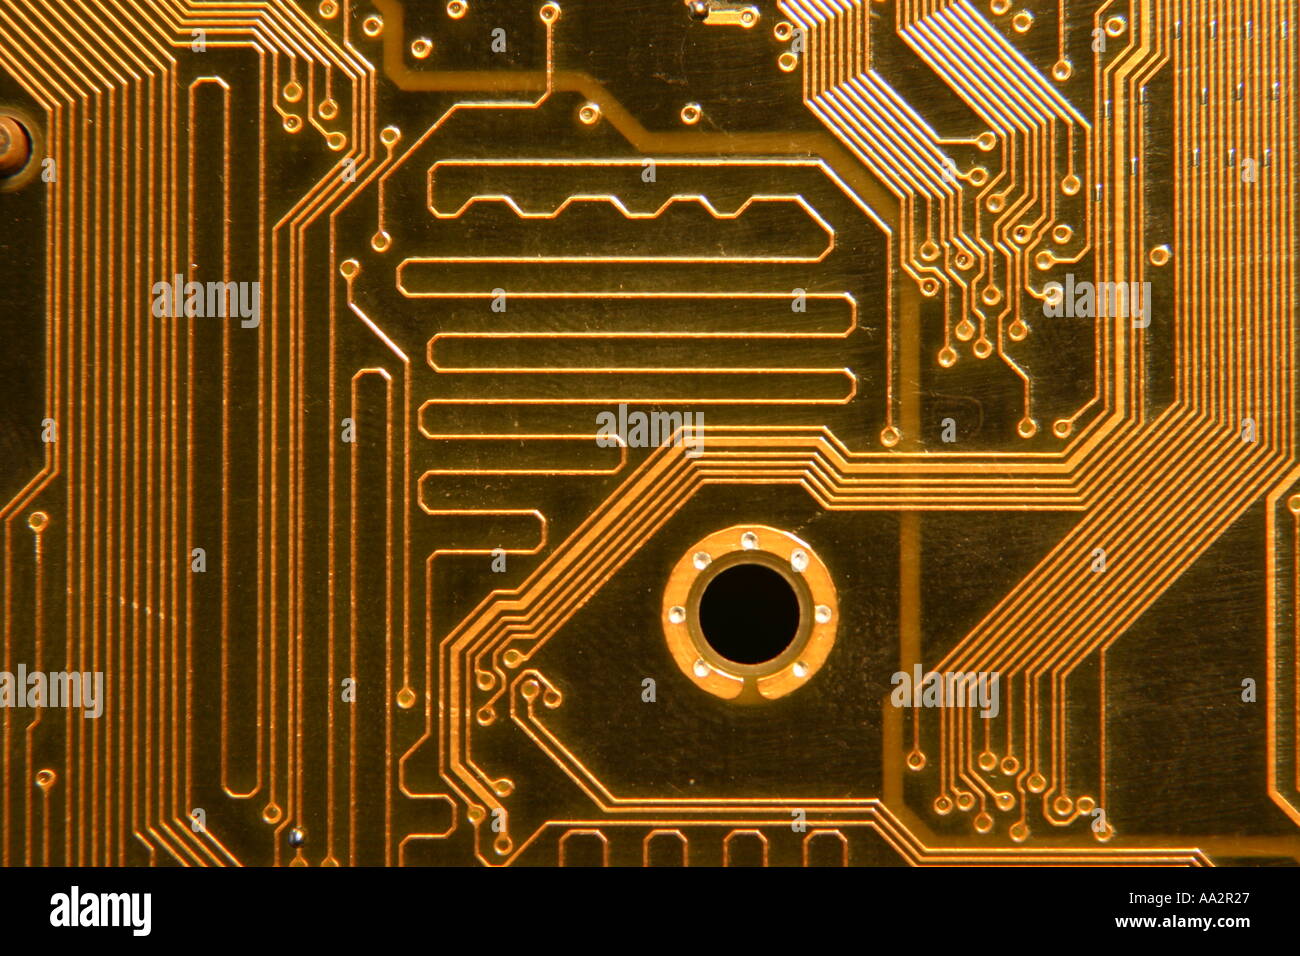 printed circuit board of a computer Stock Photo